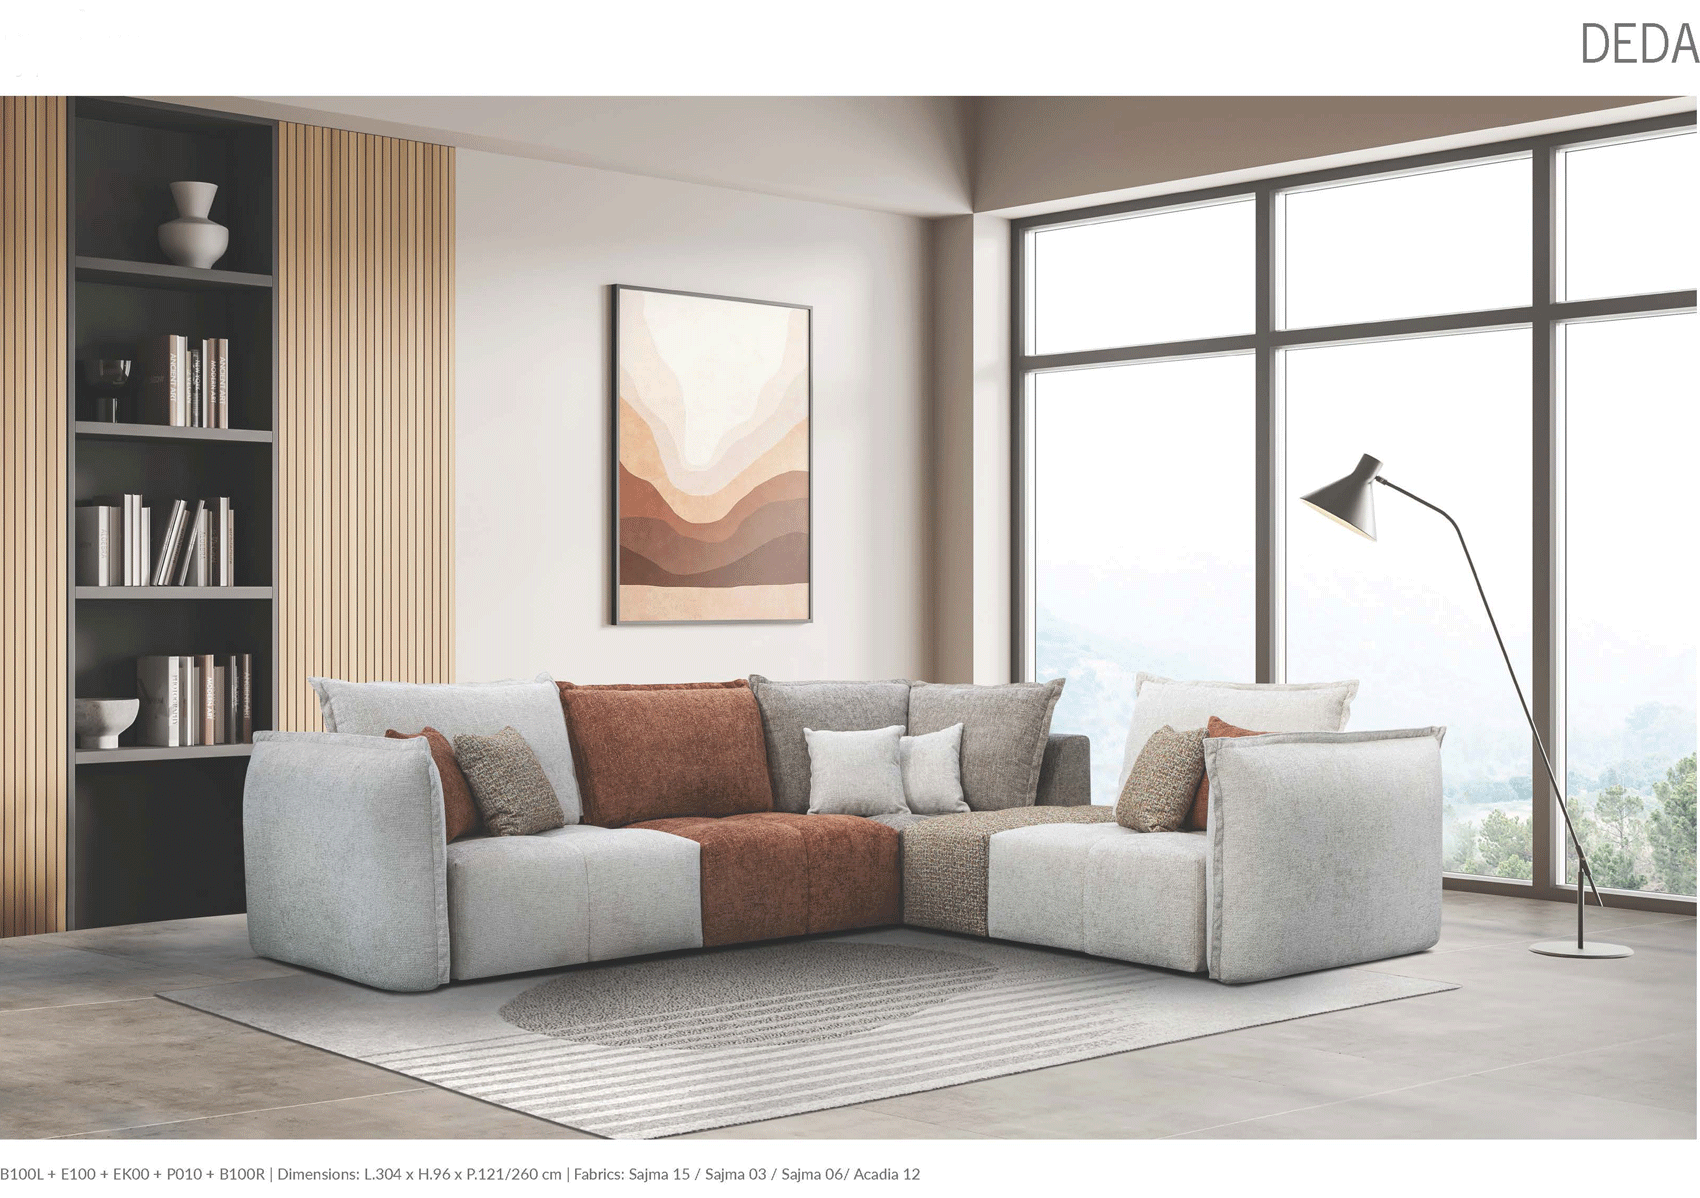 Clearance Living Room Deda Sectional